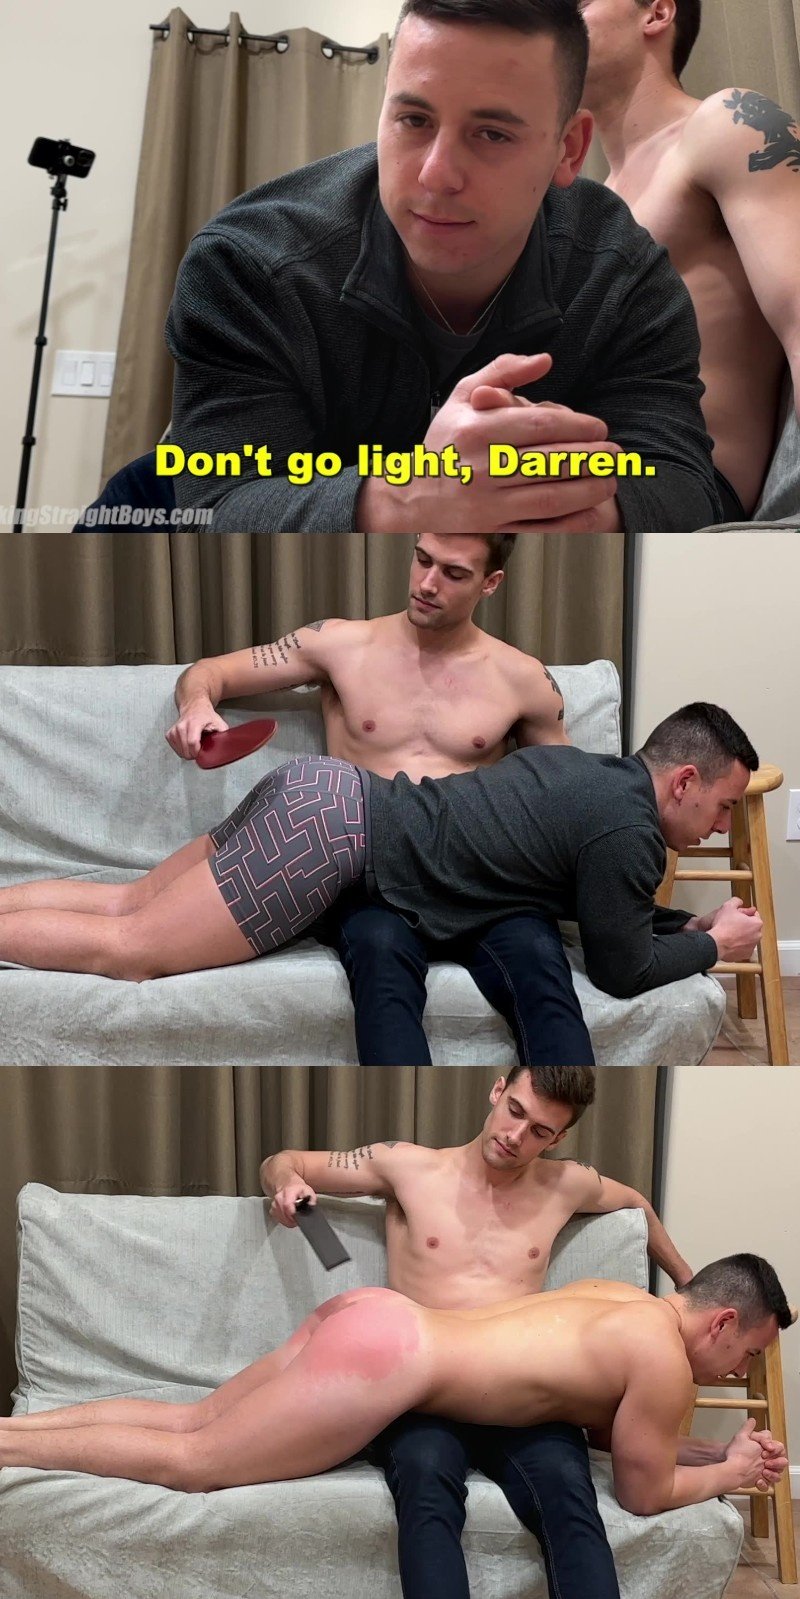 Straight Boys Paddle Each Other in Flip Spanking Video